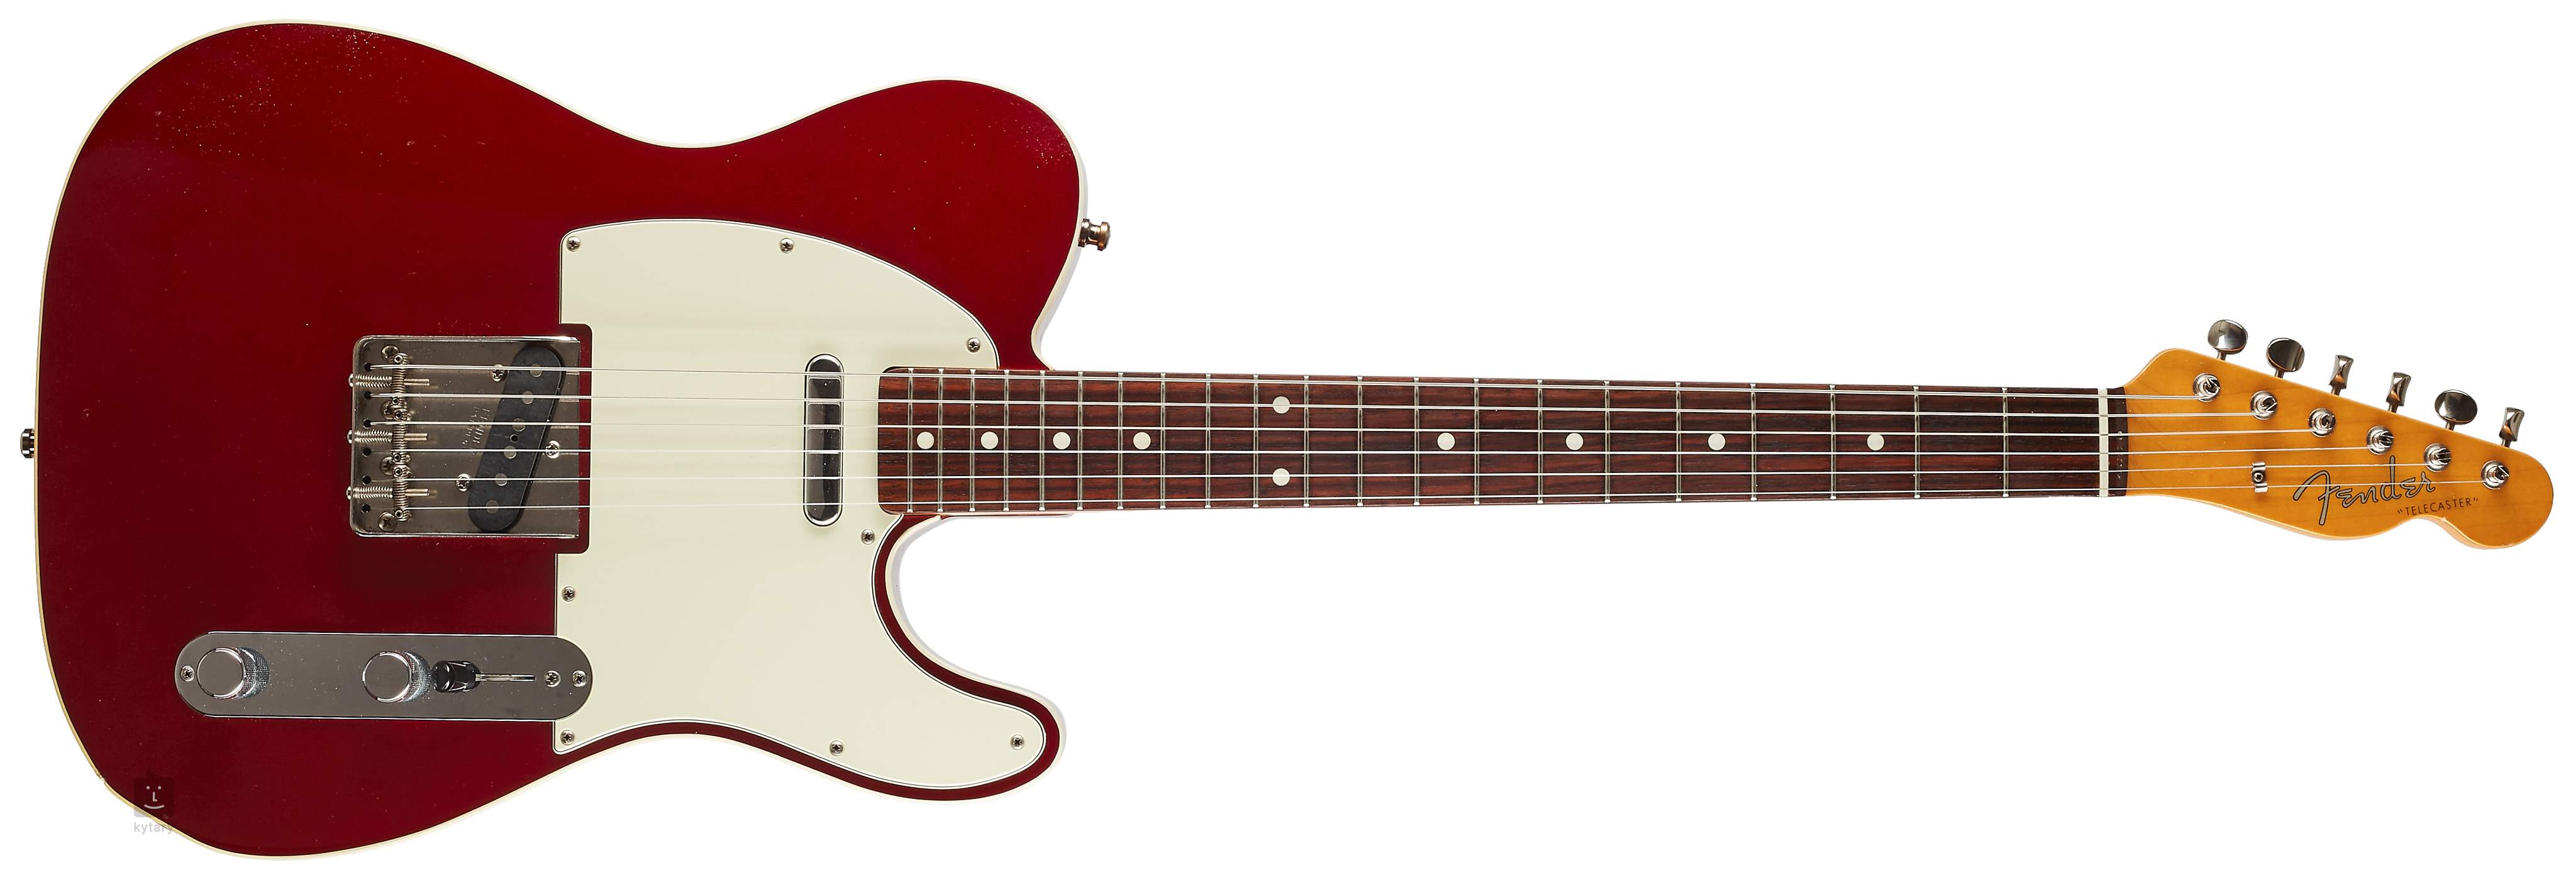 candy apple red telecaster